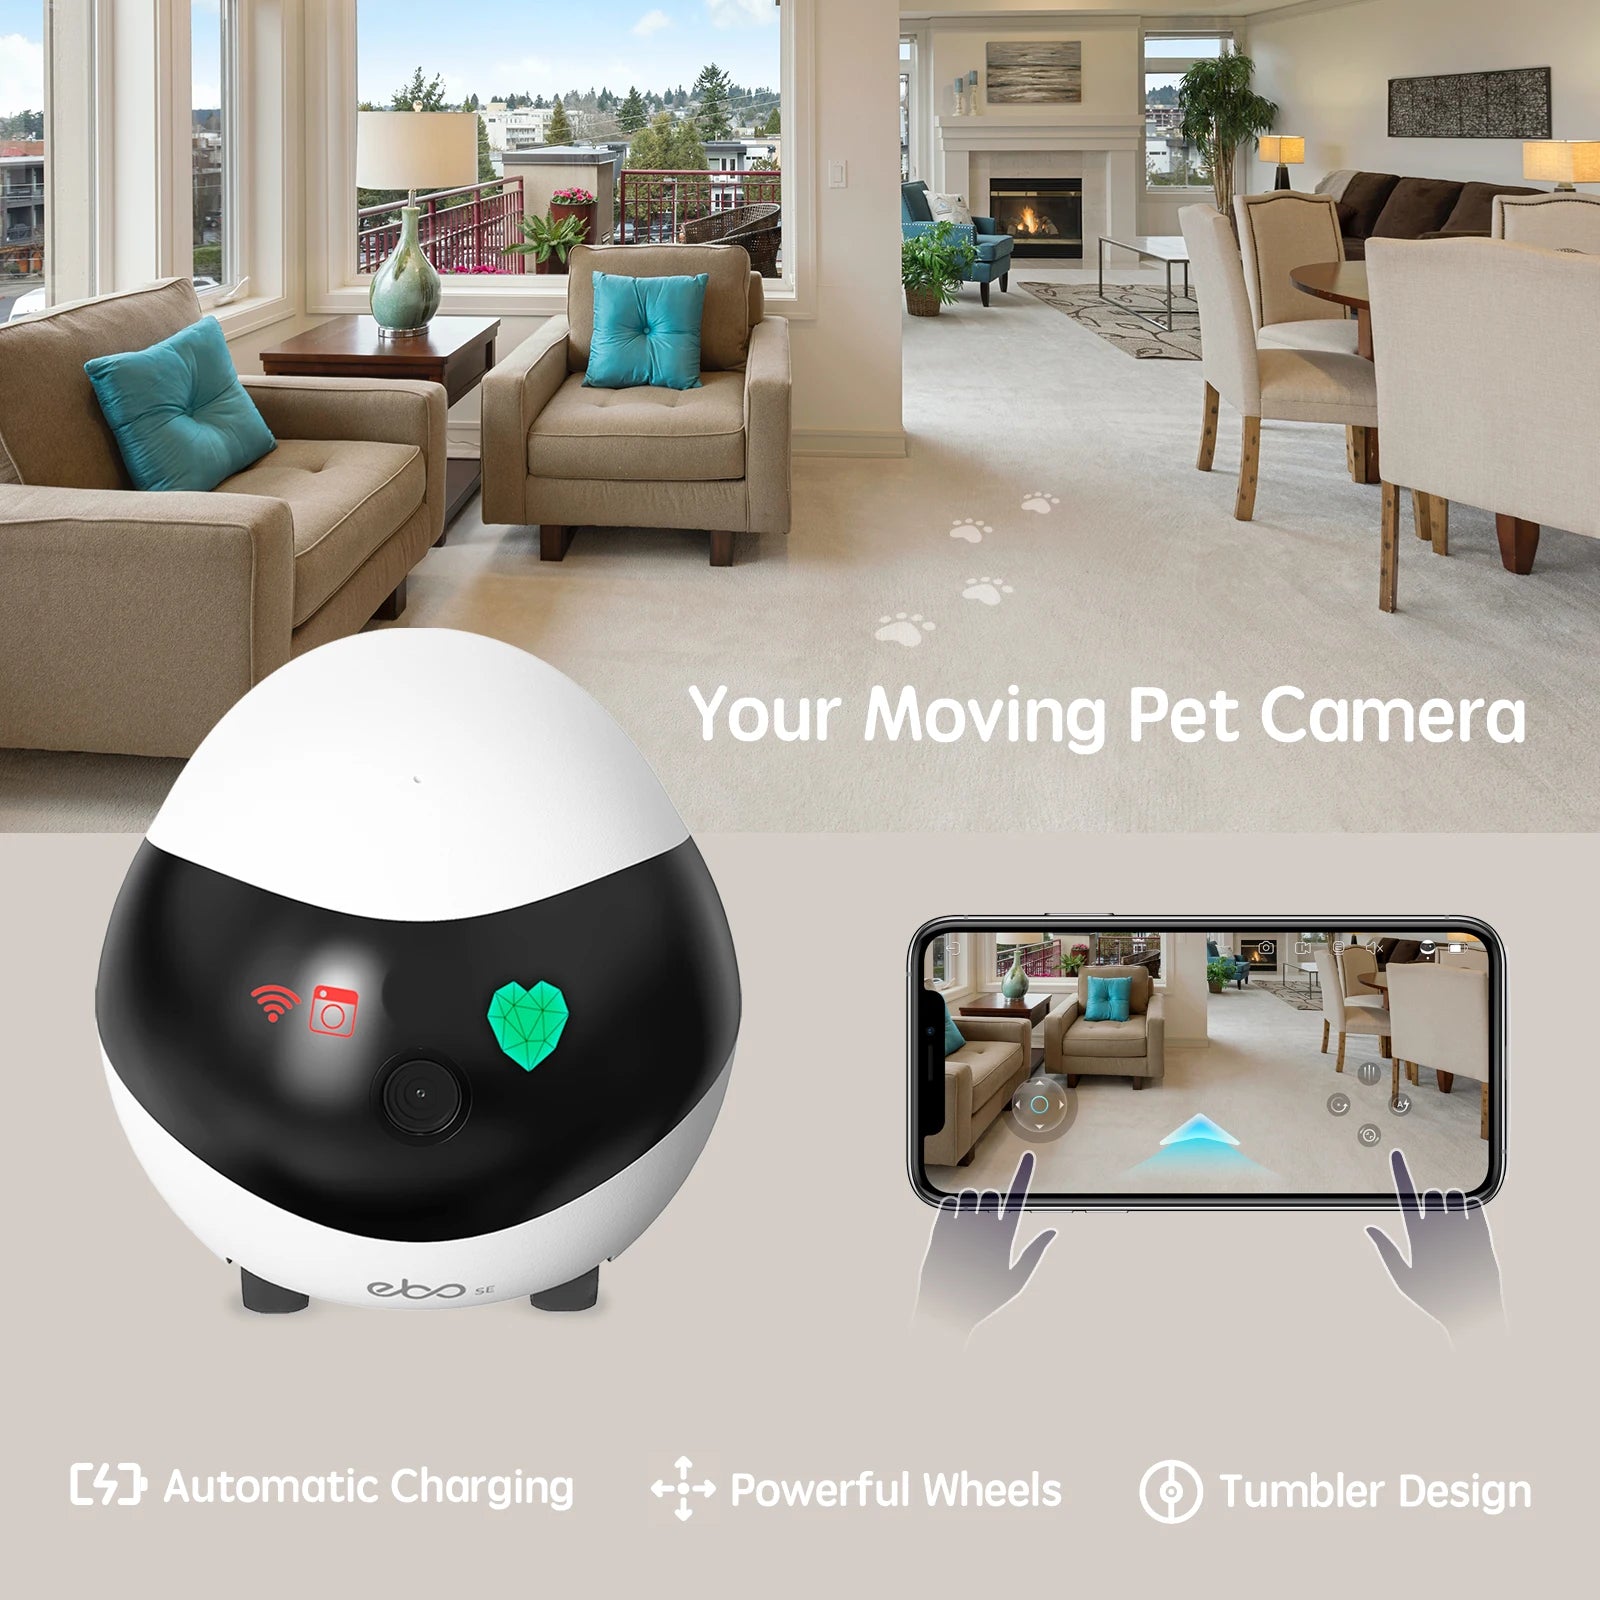 ENABOT PET HOME SECURITY CAMERA